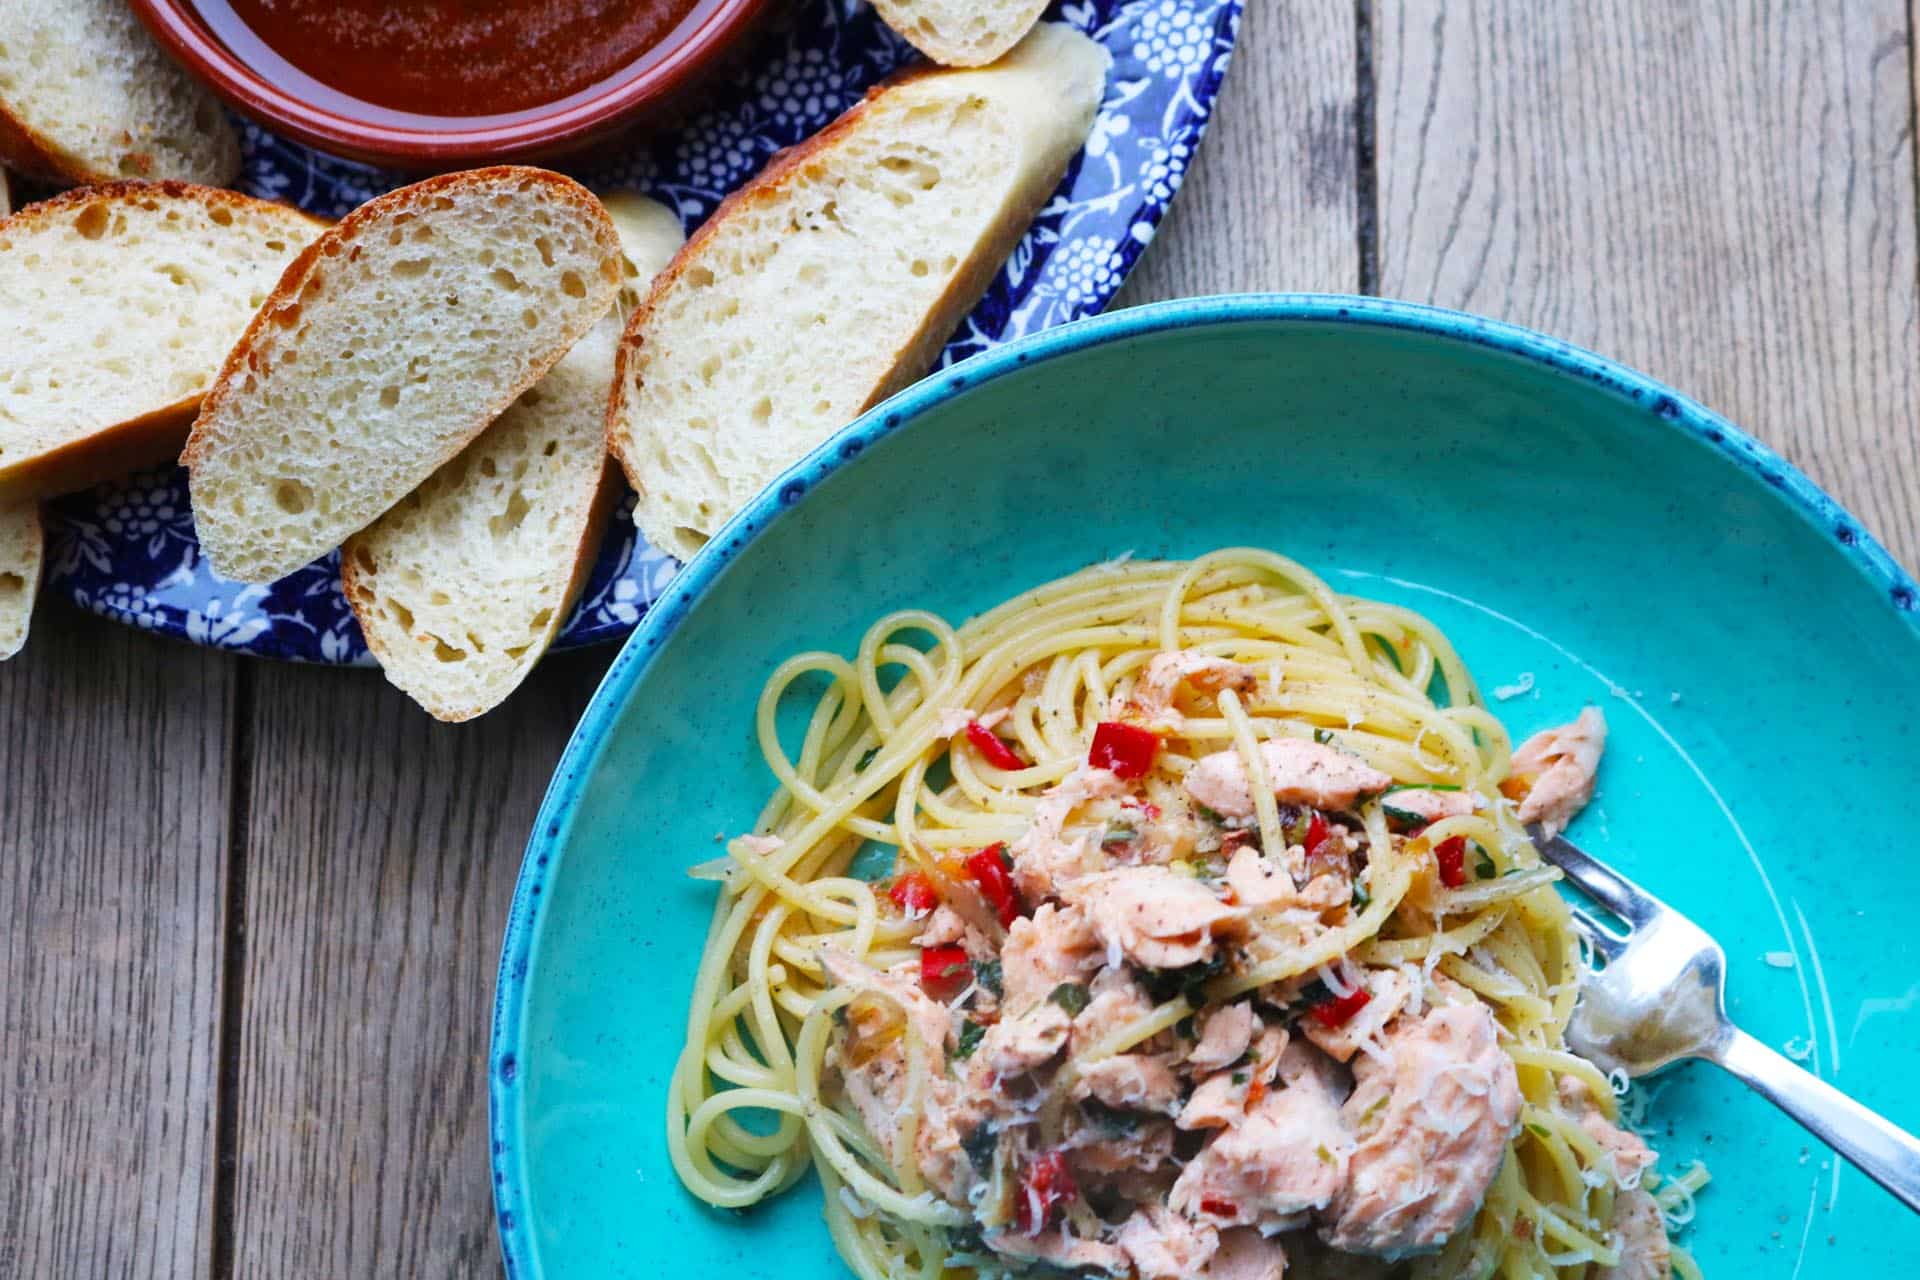 Spaghetti and salmon served in a turquoise blue pasta bowl with bread and oil on a plate on the side